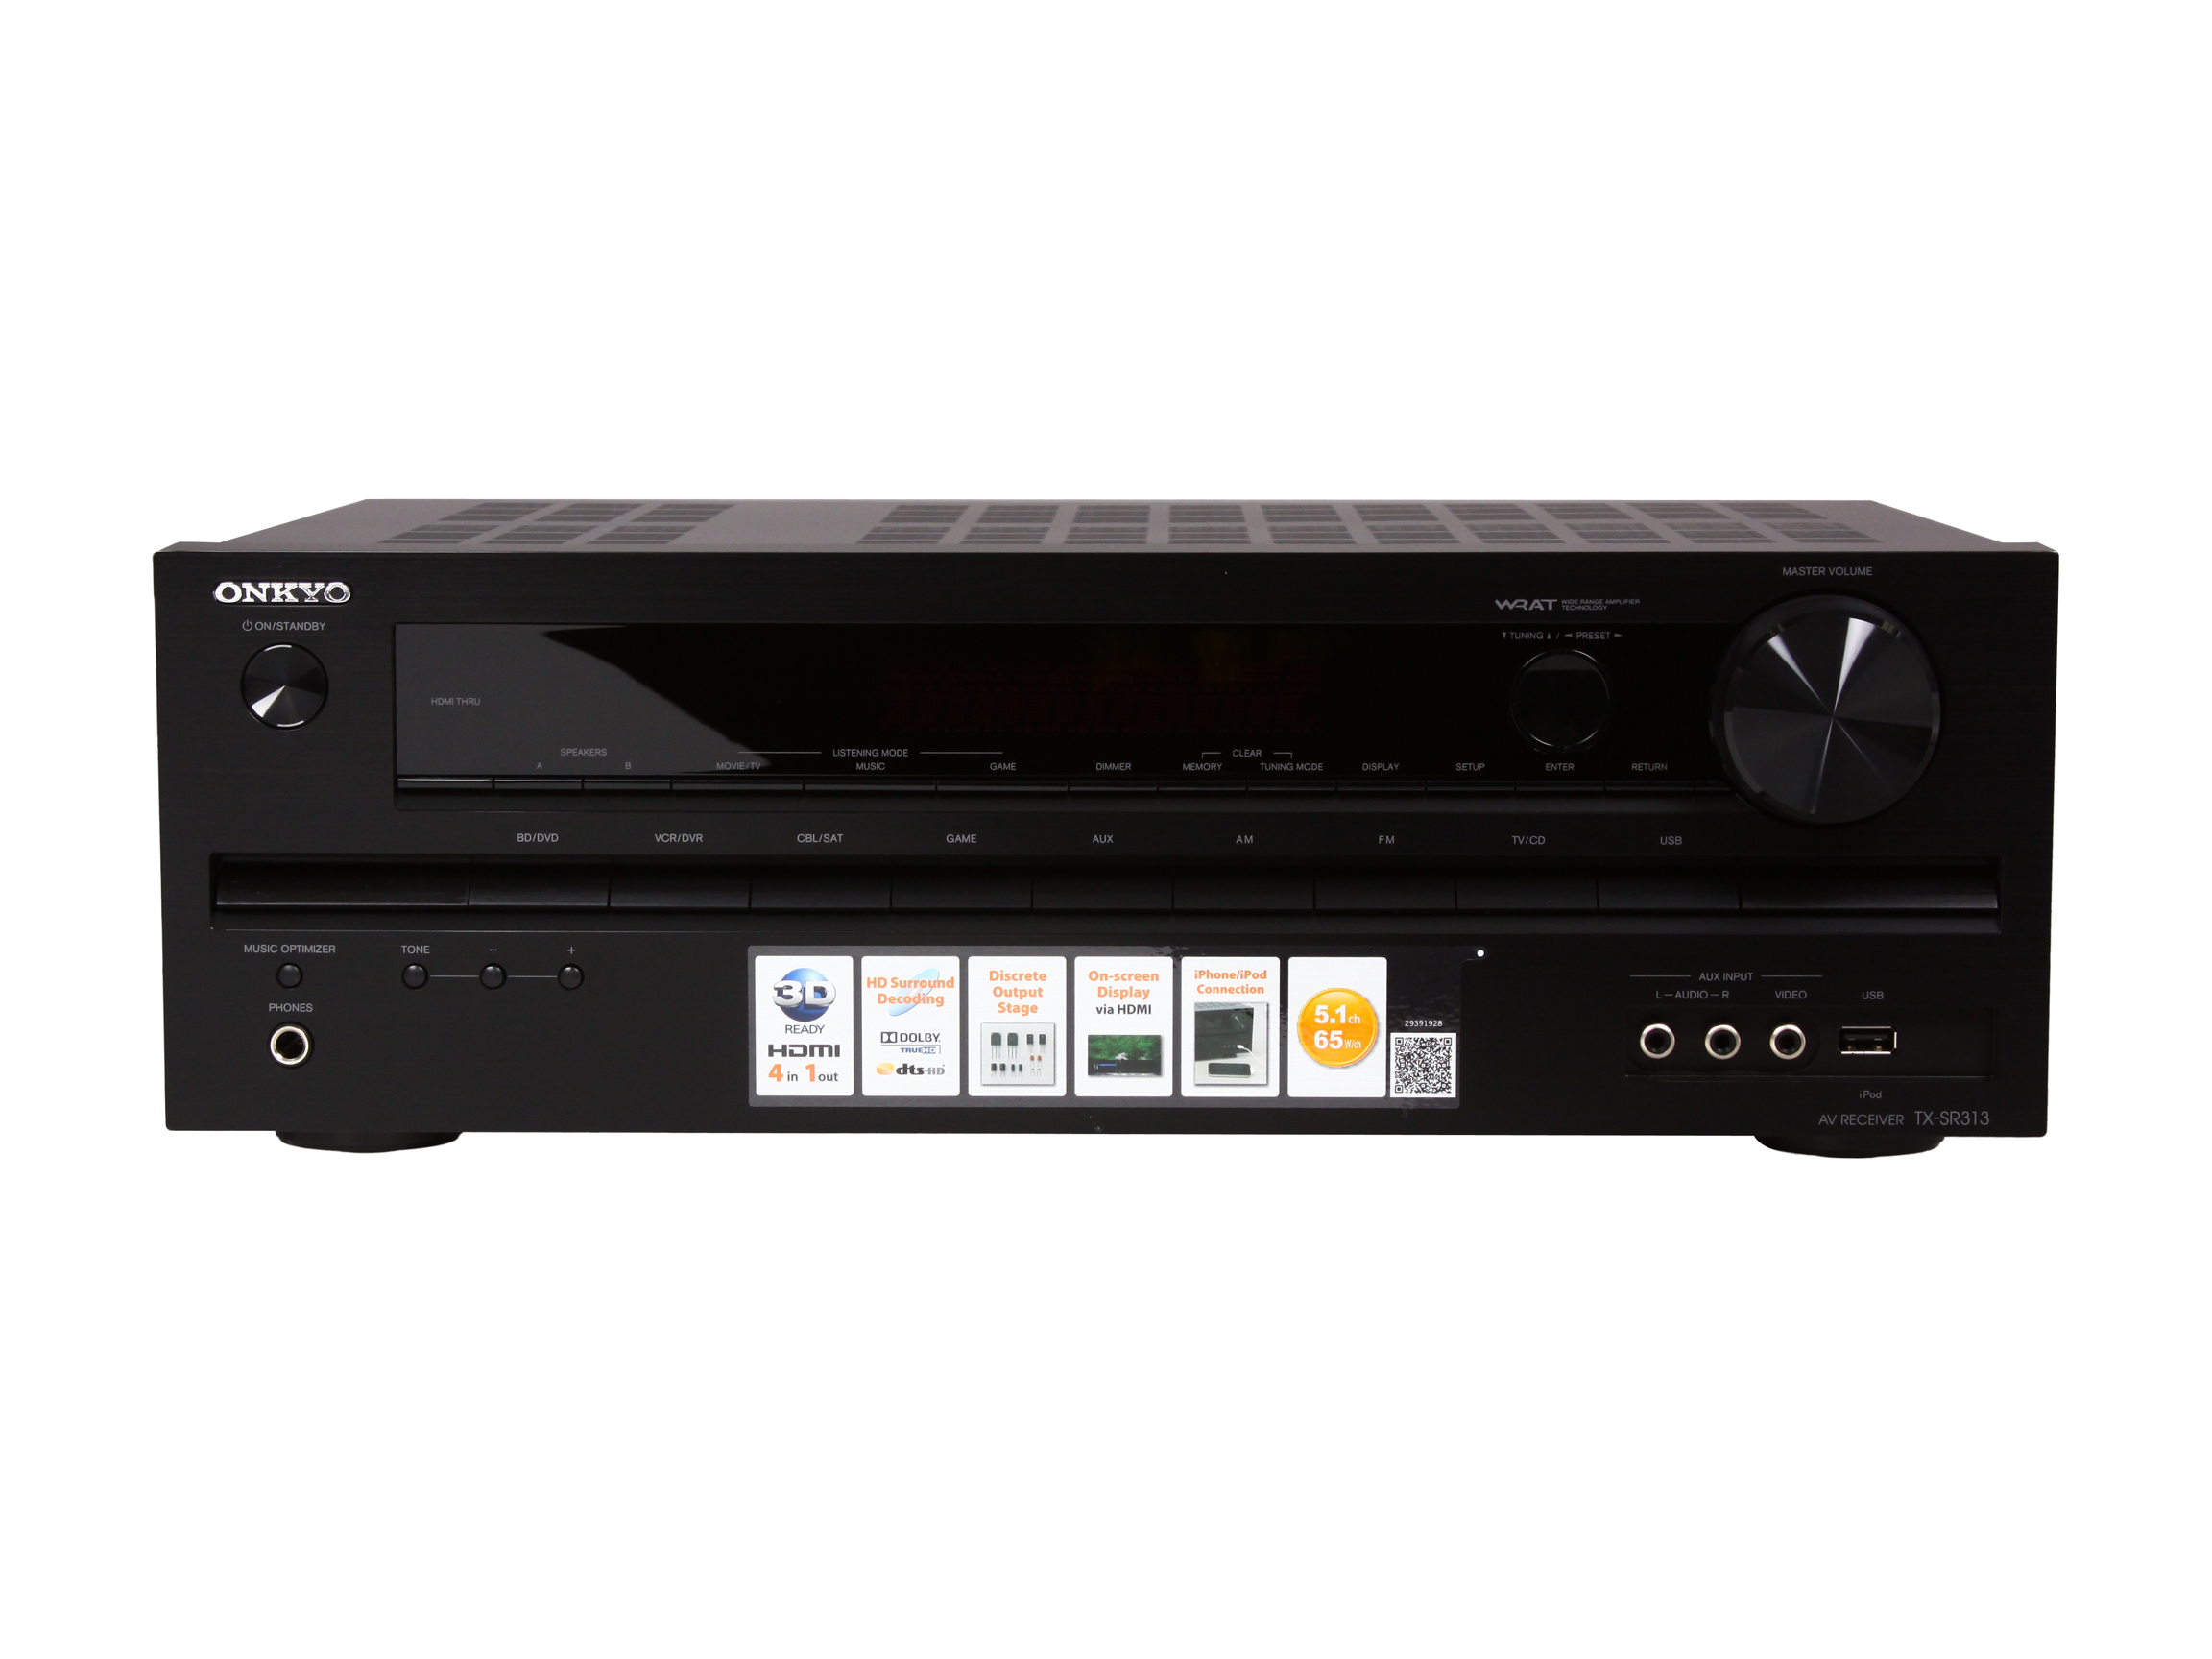 ONKYO TX SR313 5.1 Channel 3D Ready Home Theater Receiver